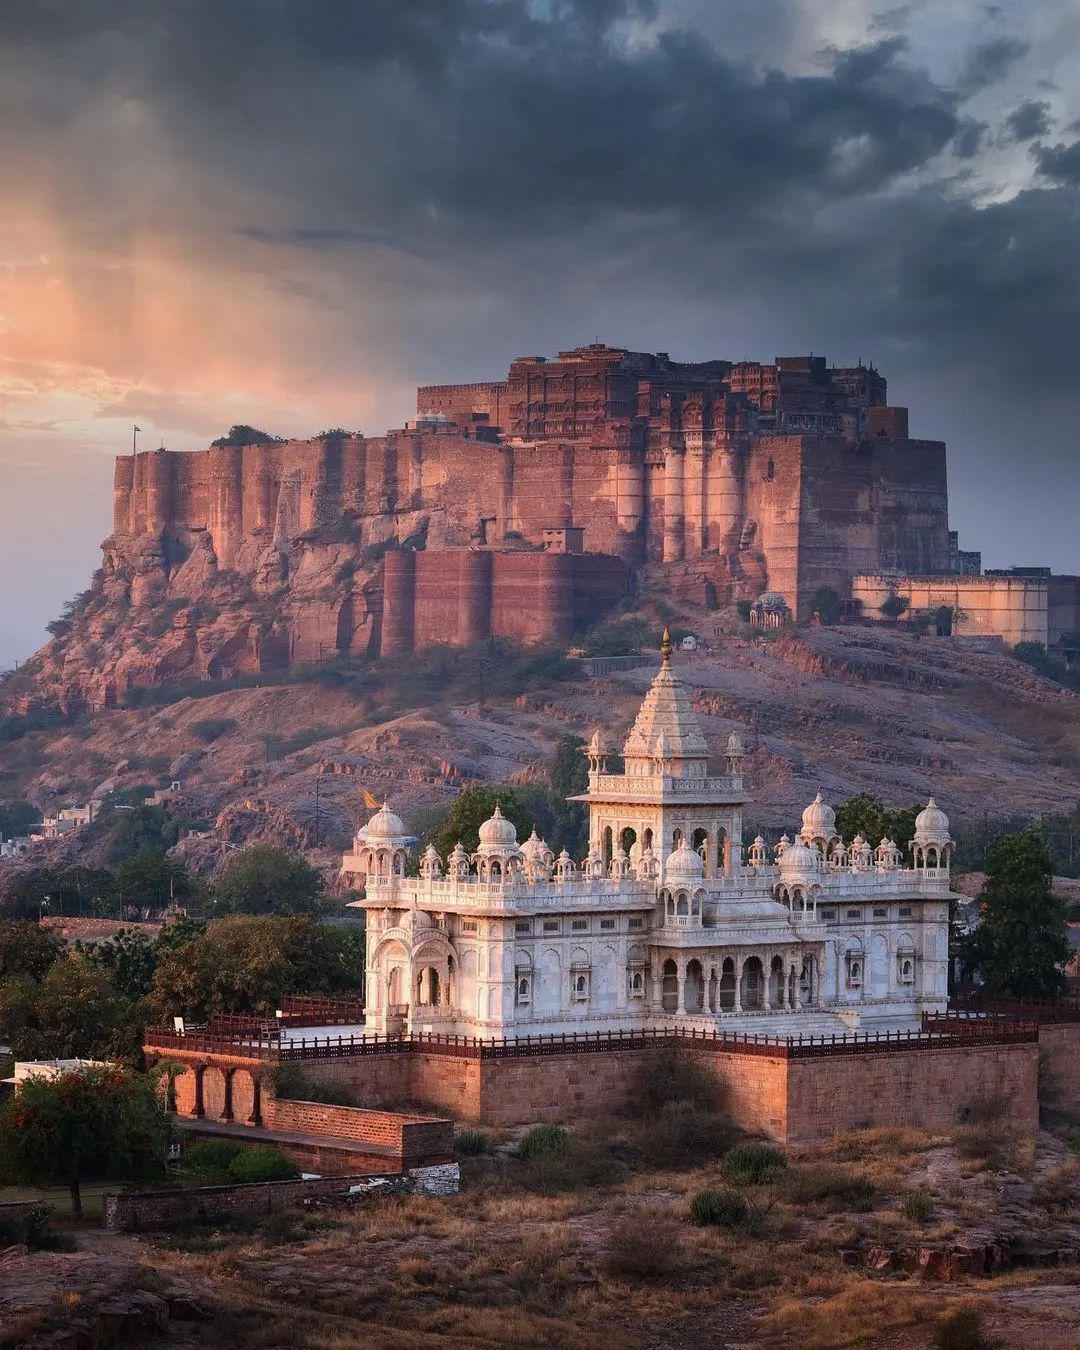 Mehrangarh fort (back) and Jaswant Thada (front) , Jodhpur, India. Built in 15th century. Beautiful example of medeival Rajasthani architecture.jpeg